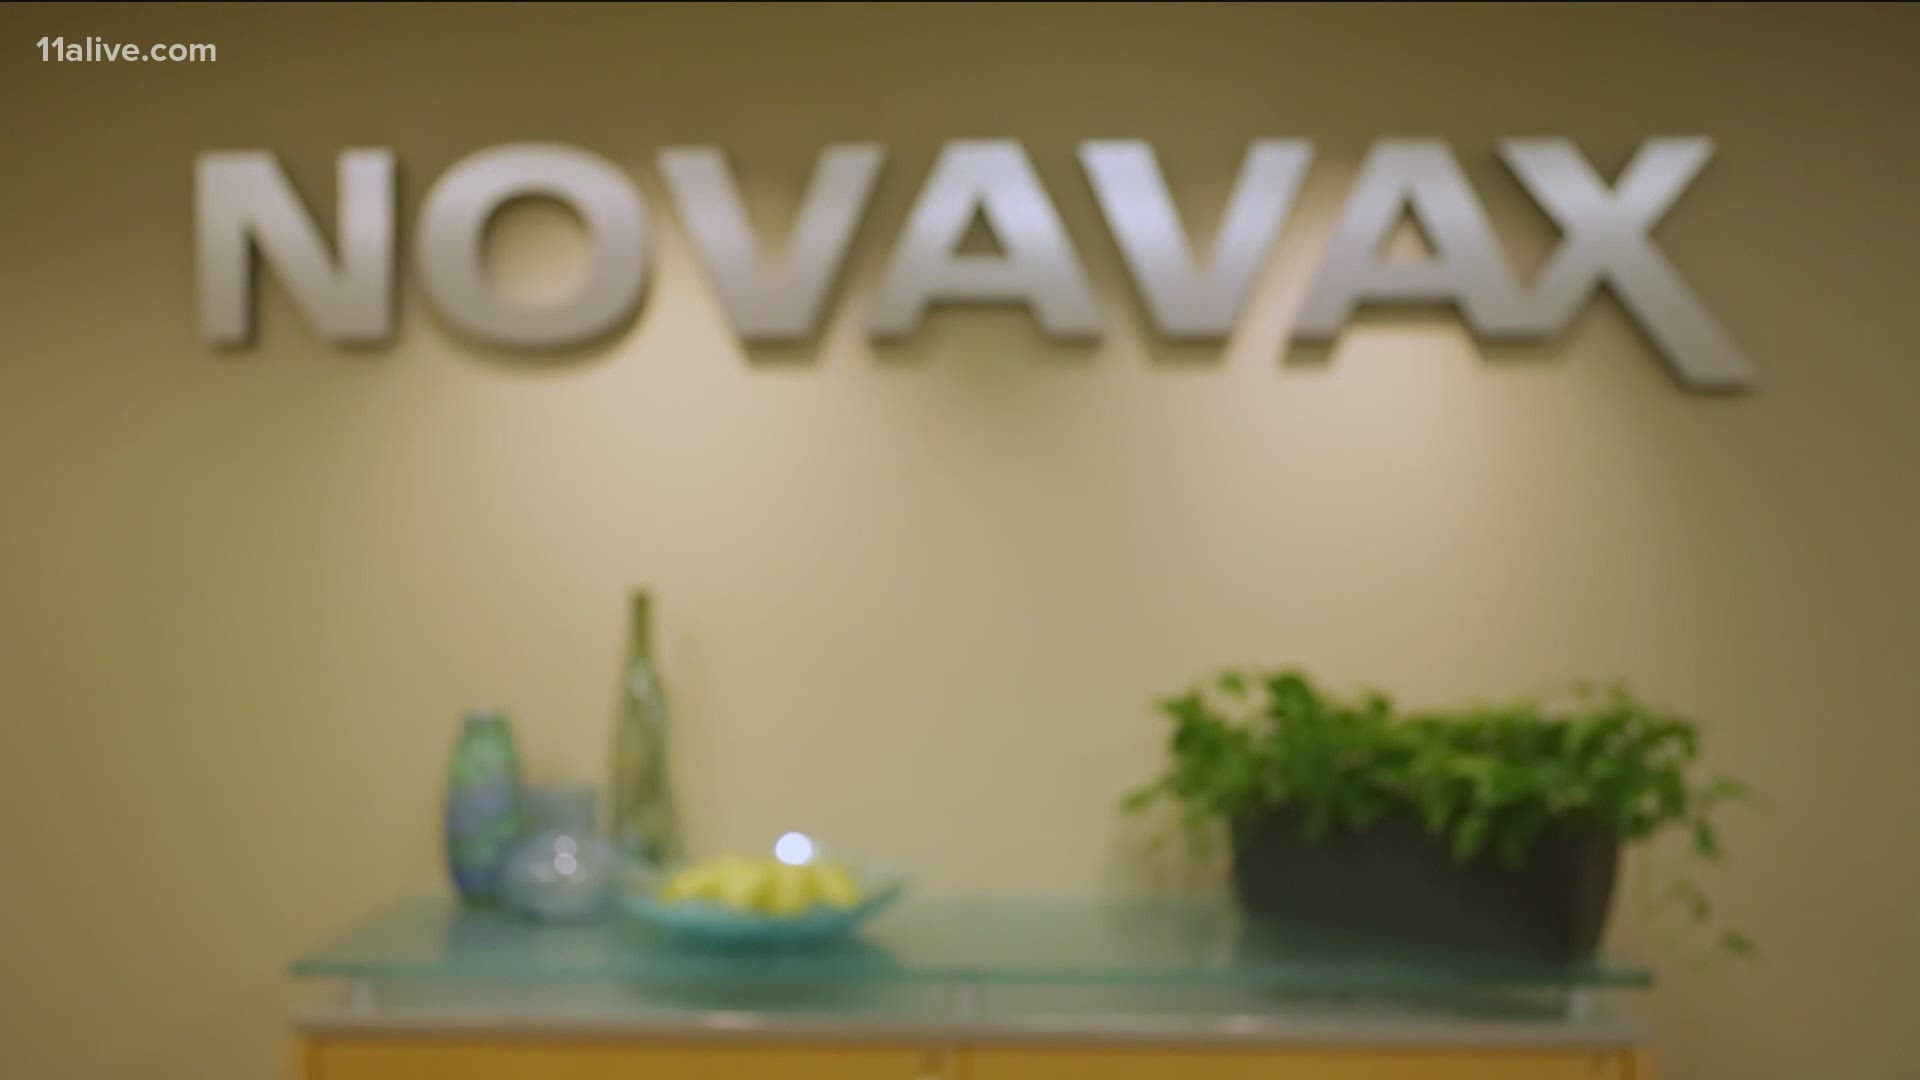 Novavax said it's planning to apply for emergency use in the U.S. in the third quarter of this year.